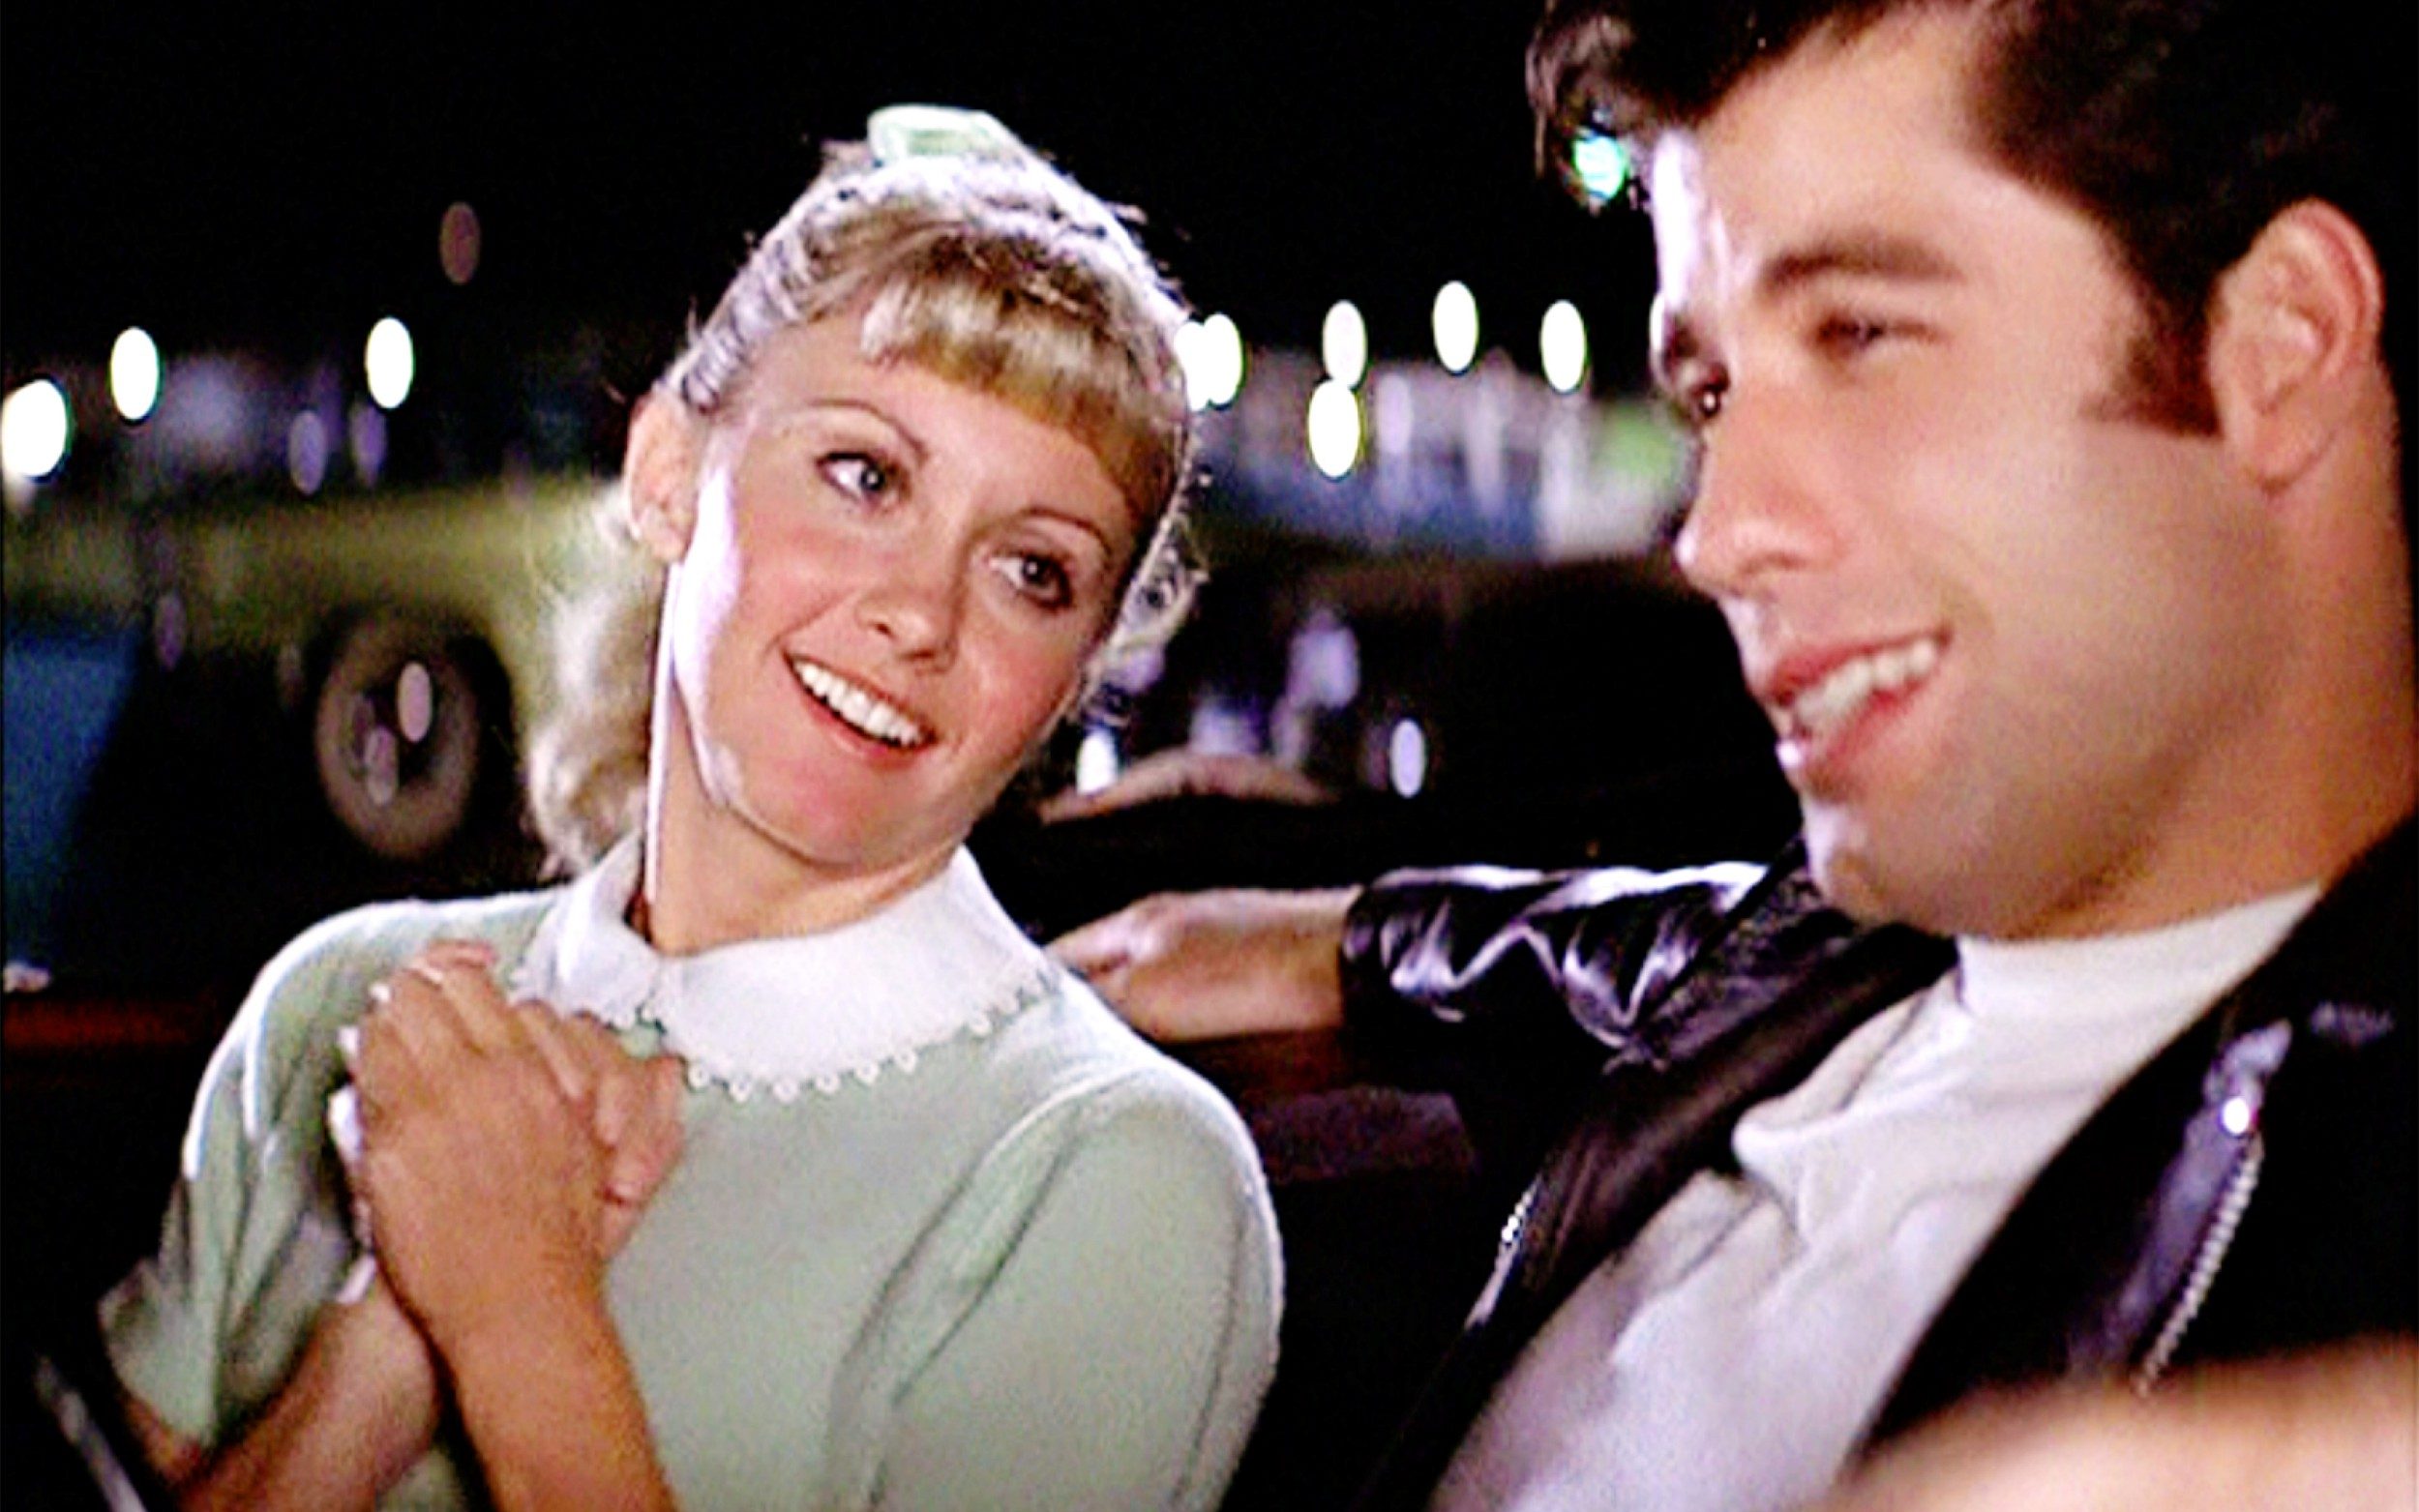 susan buckner, the actress who played patty in grease, dies aged 72